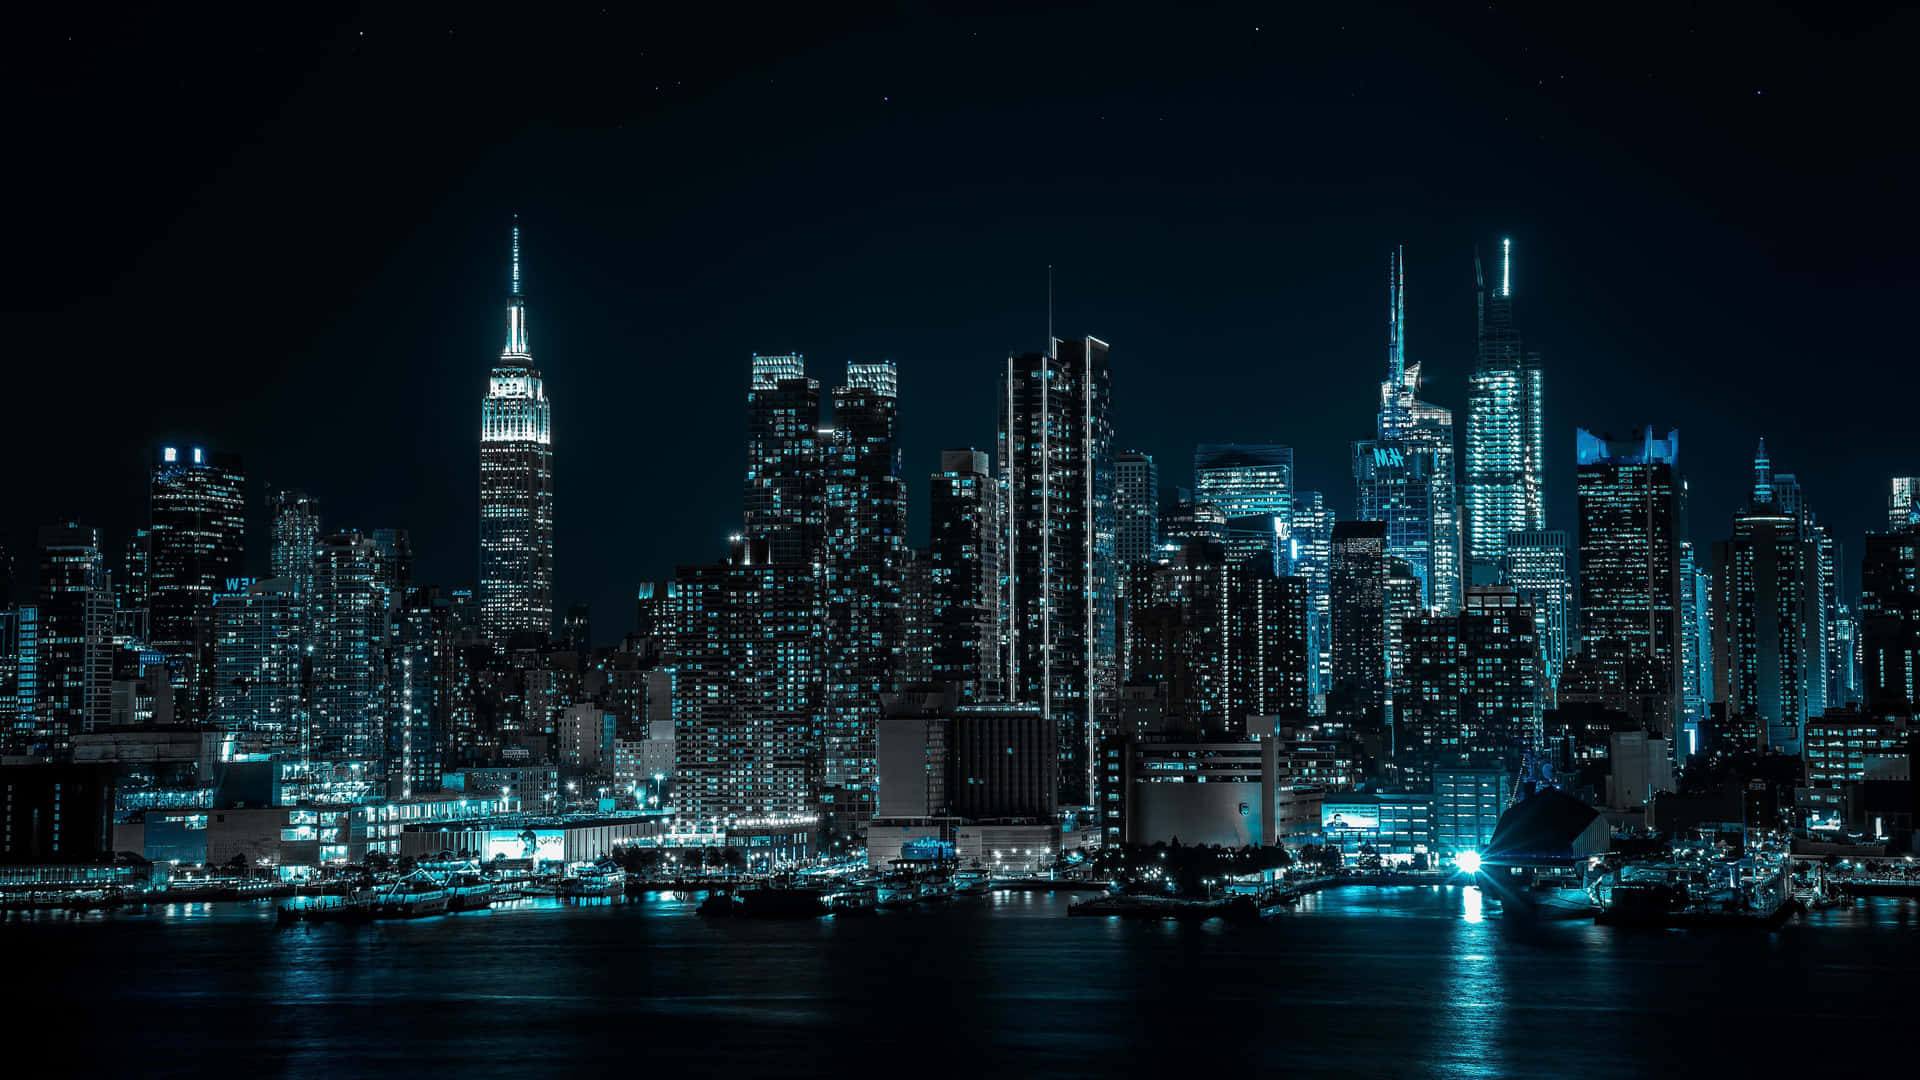 All lights on in the city that never sleeps Wallpaper